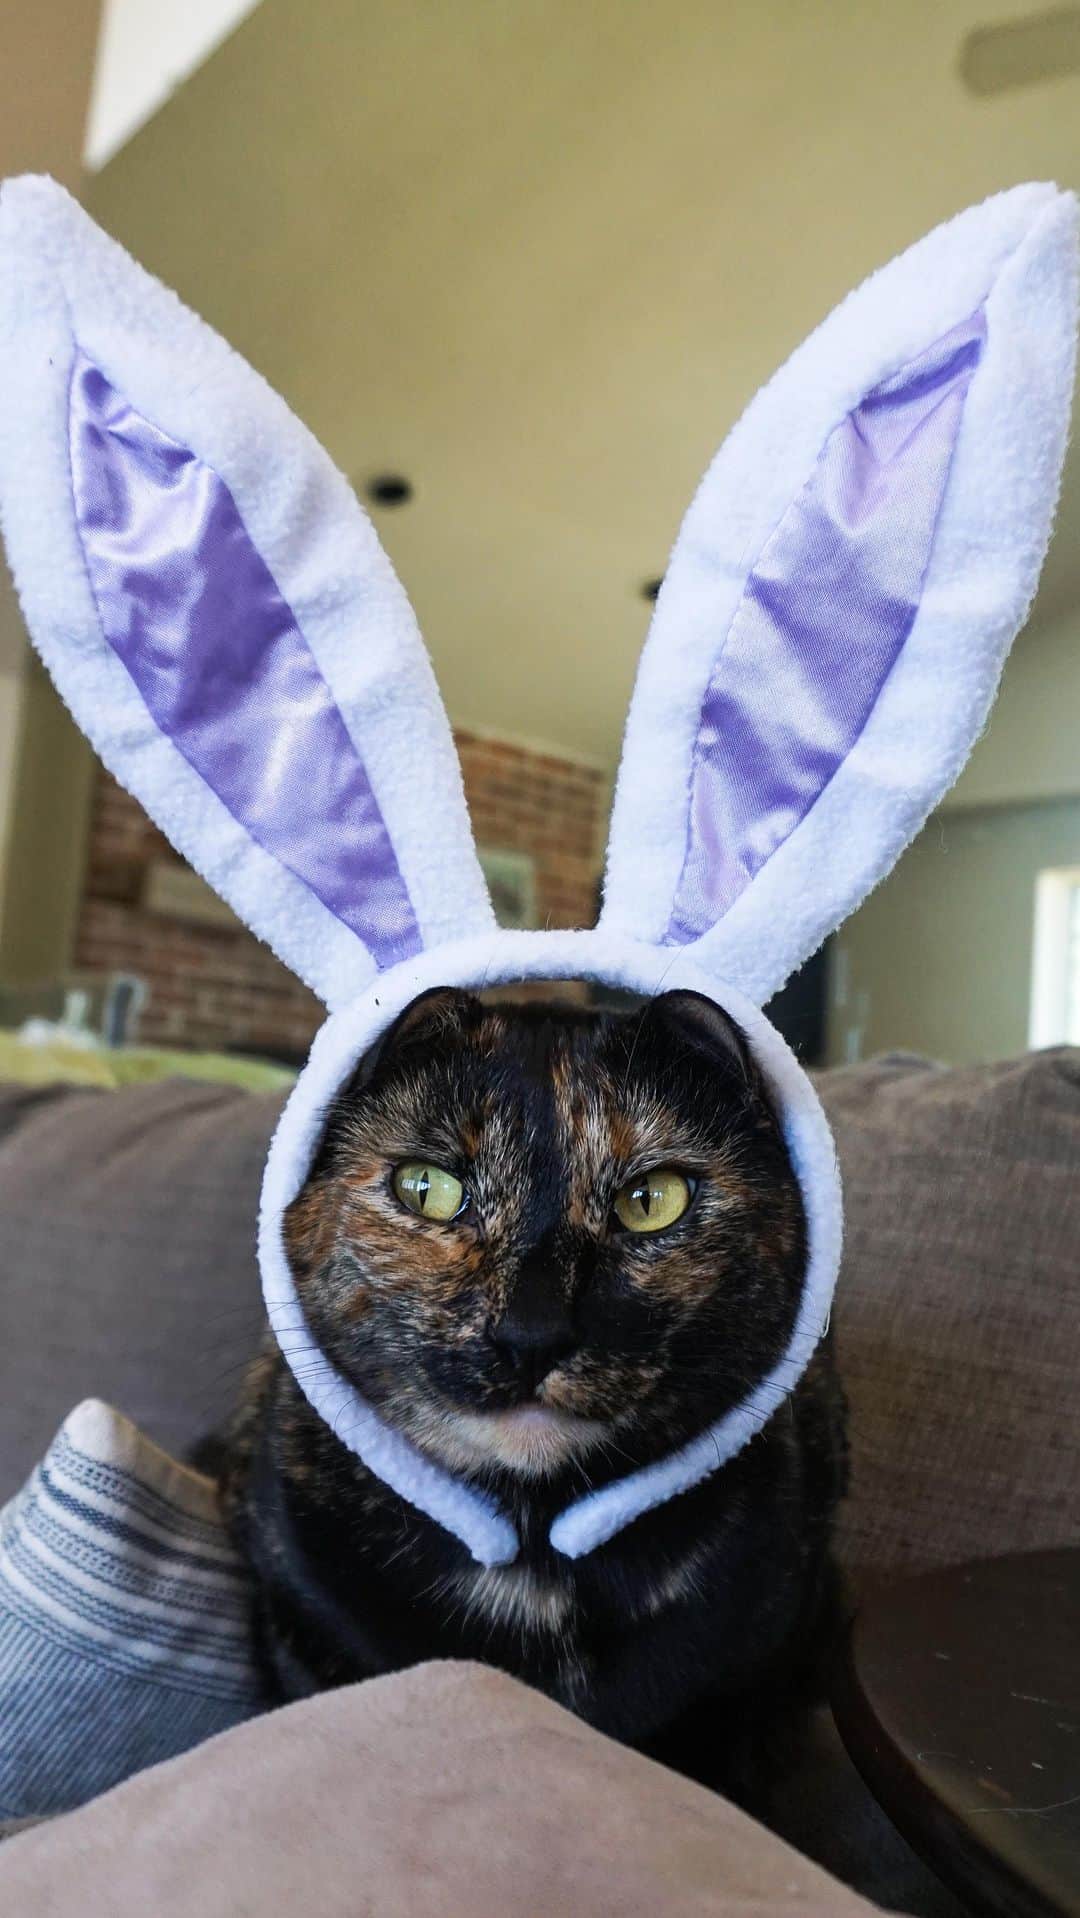 The Cats Of Instagramのインスタグラム：「Hey Everybunny 🐰, This weekend is Easter and do you know what we’re NOT going to do? Bring lilies into our homes or send them to friends and family with pets! Say it with me now, “LILIES ARE NOT WORTH THE RISK!” Instead, head to the @aspca website to find pet friendly flowers that are gorgeous and safe for homes with pets 🌼」